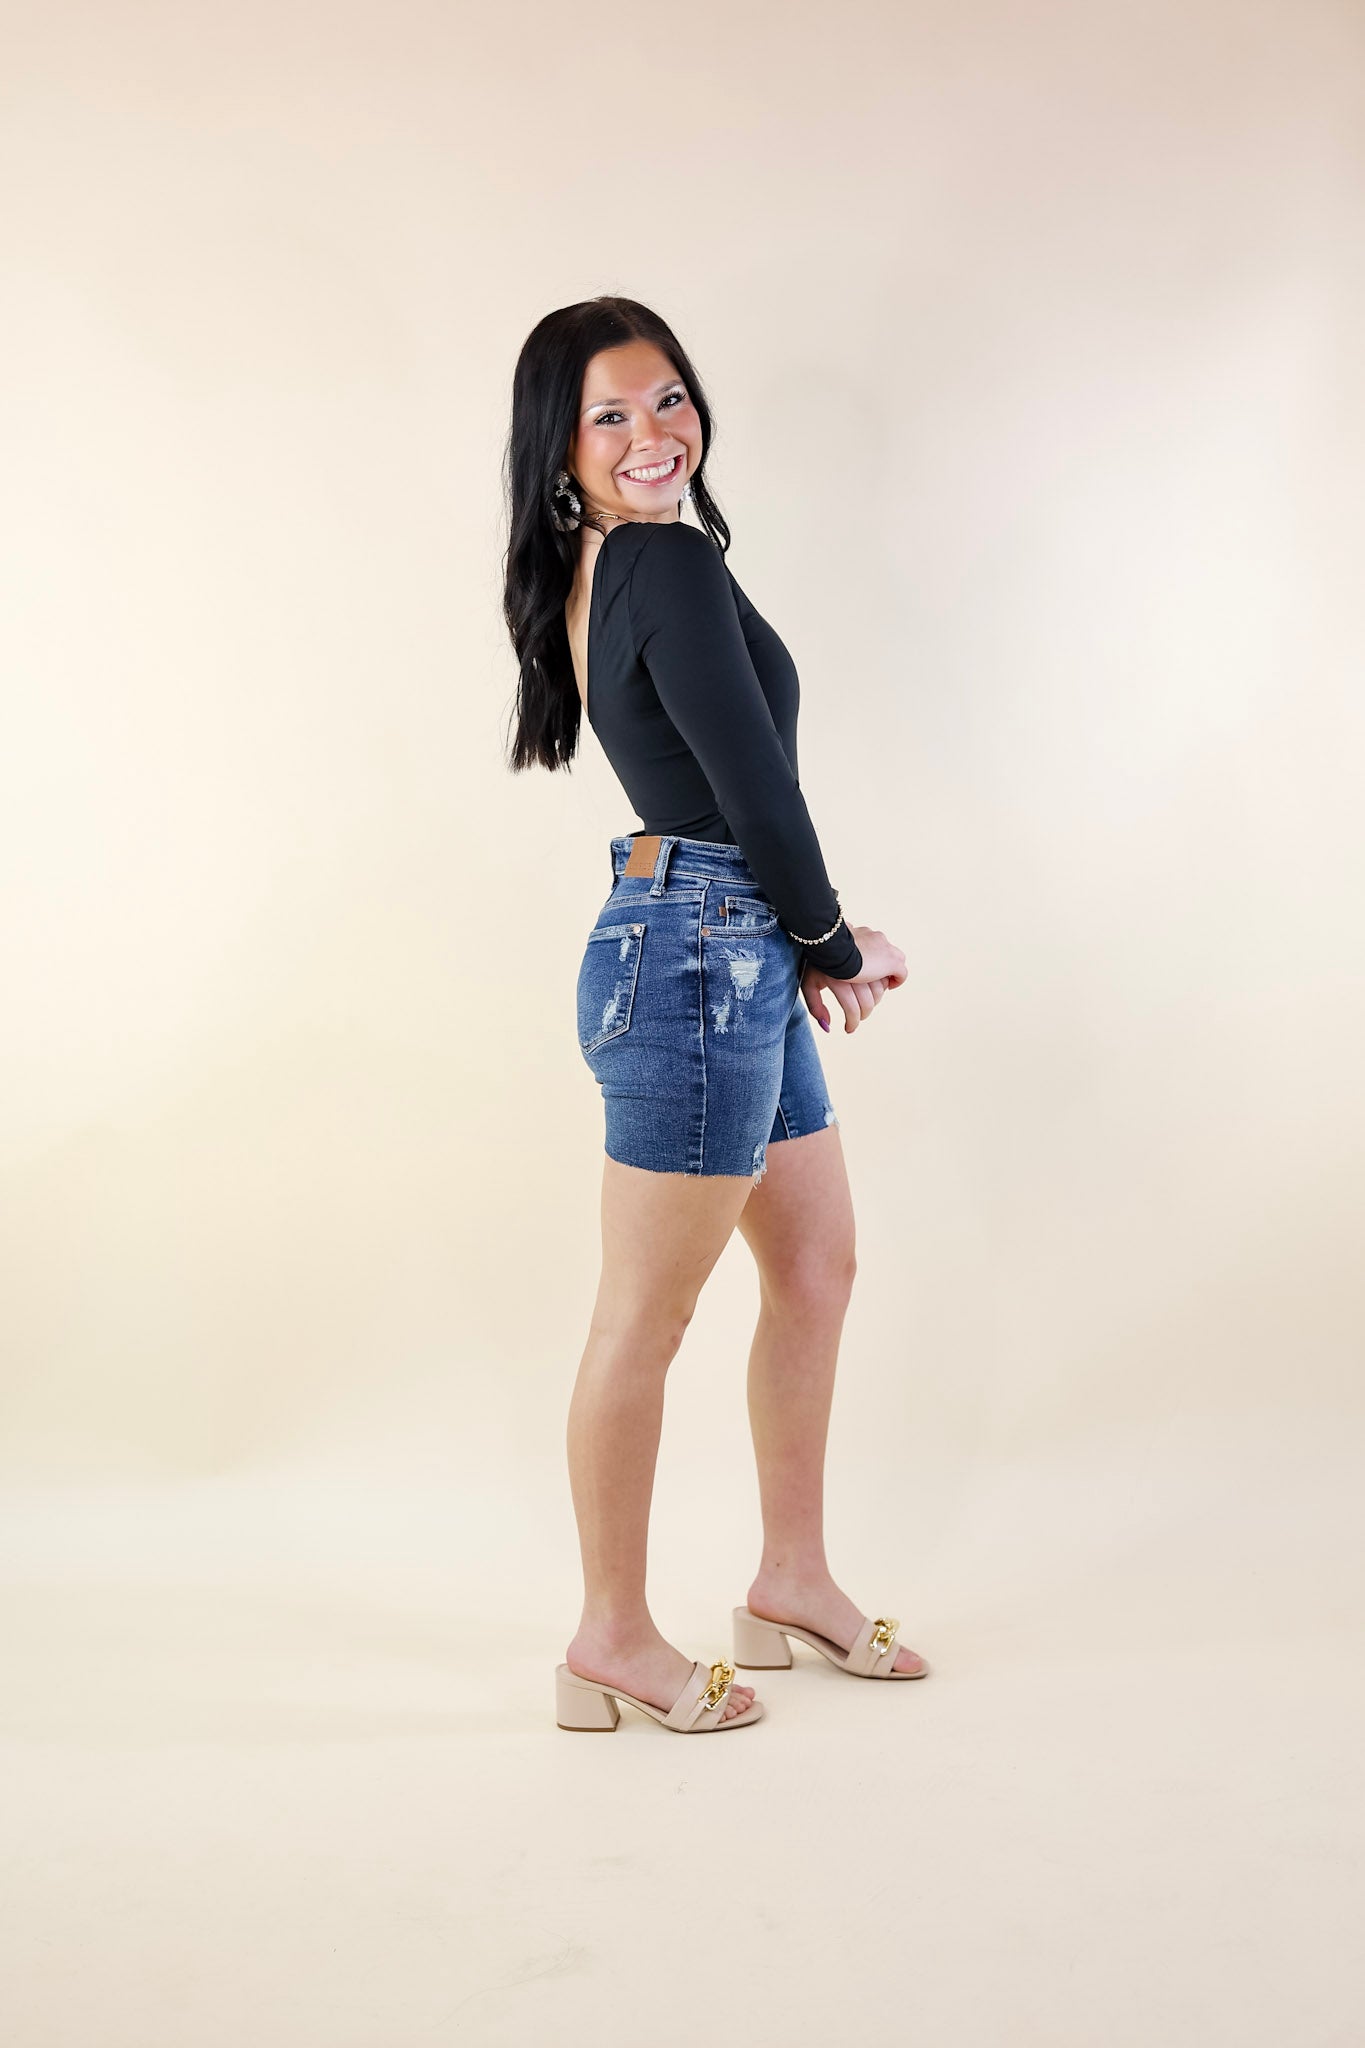 Judy Blue | Heat of the Moment High Rise Mid Thigh Distressed Denim Shorts in Dark Wash - Giddy Up Glamour Boutique